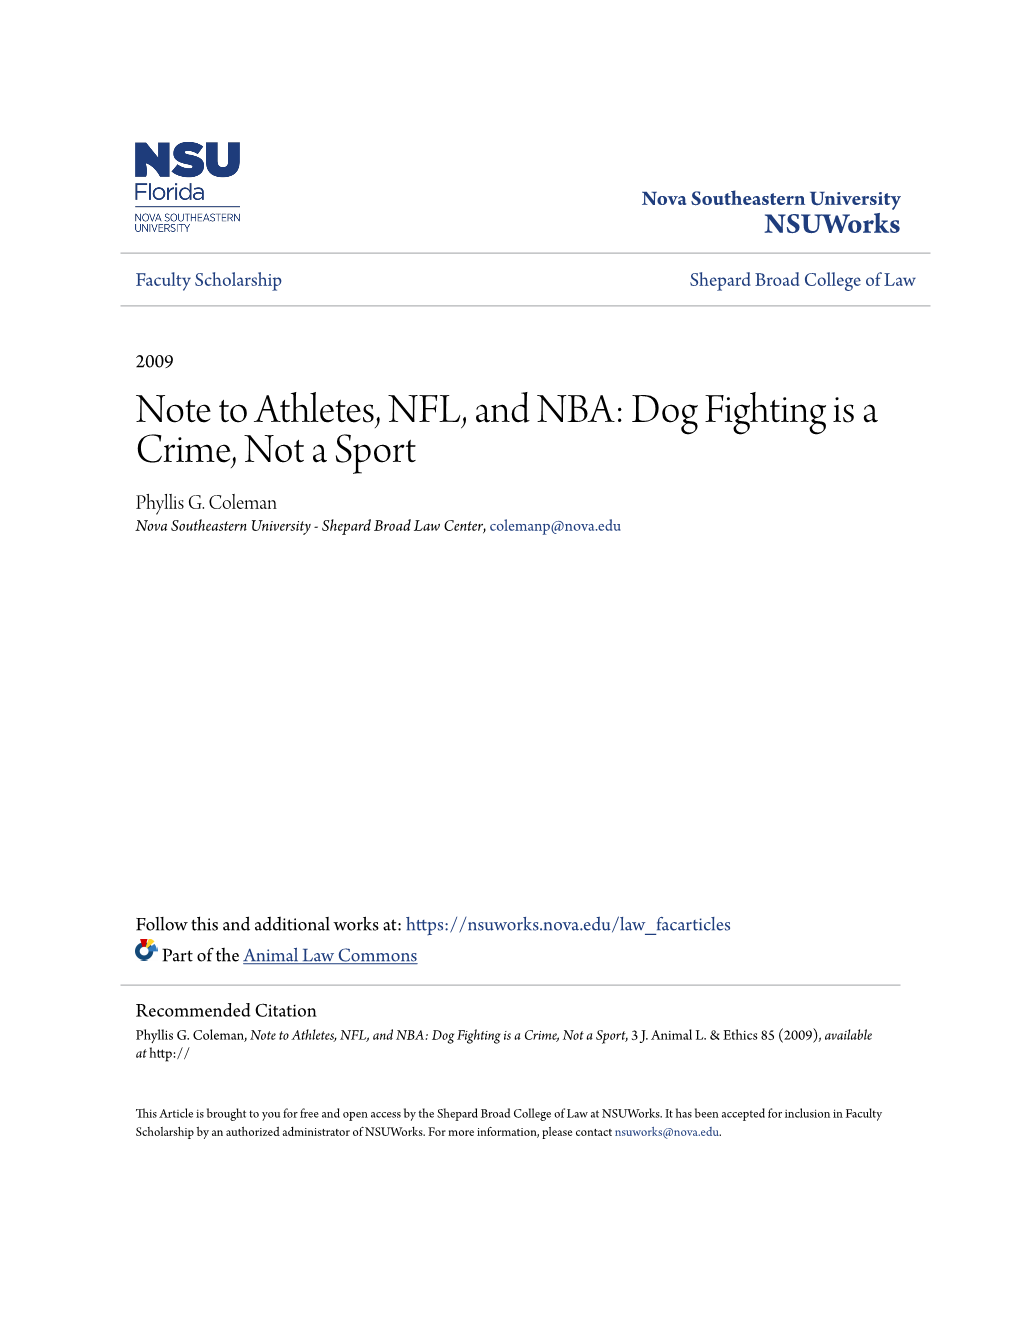 Note to Athletes, NFL, and NBA: Dog Fighting Is a Crime, Not a Sport Phyllis G